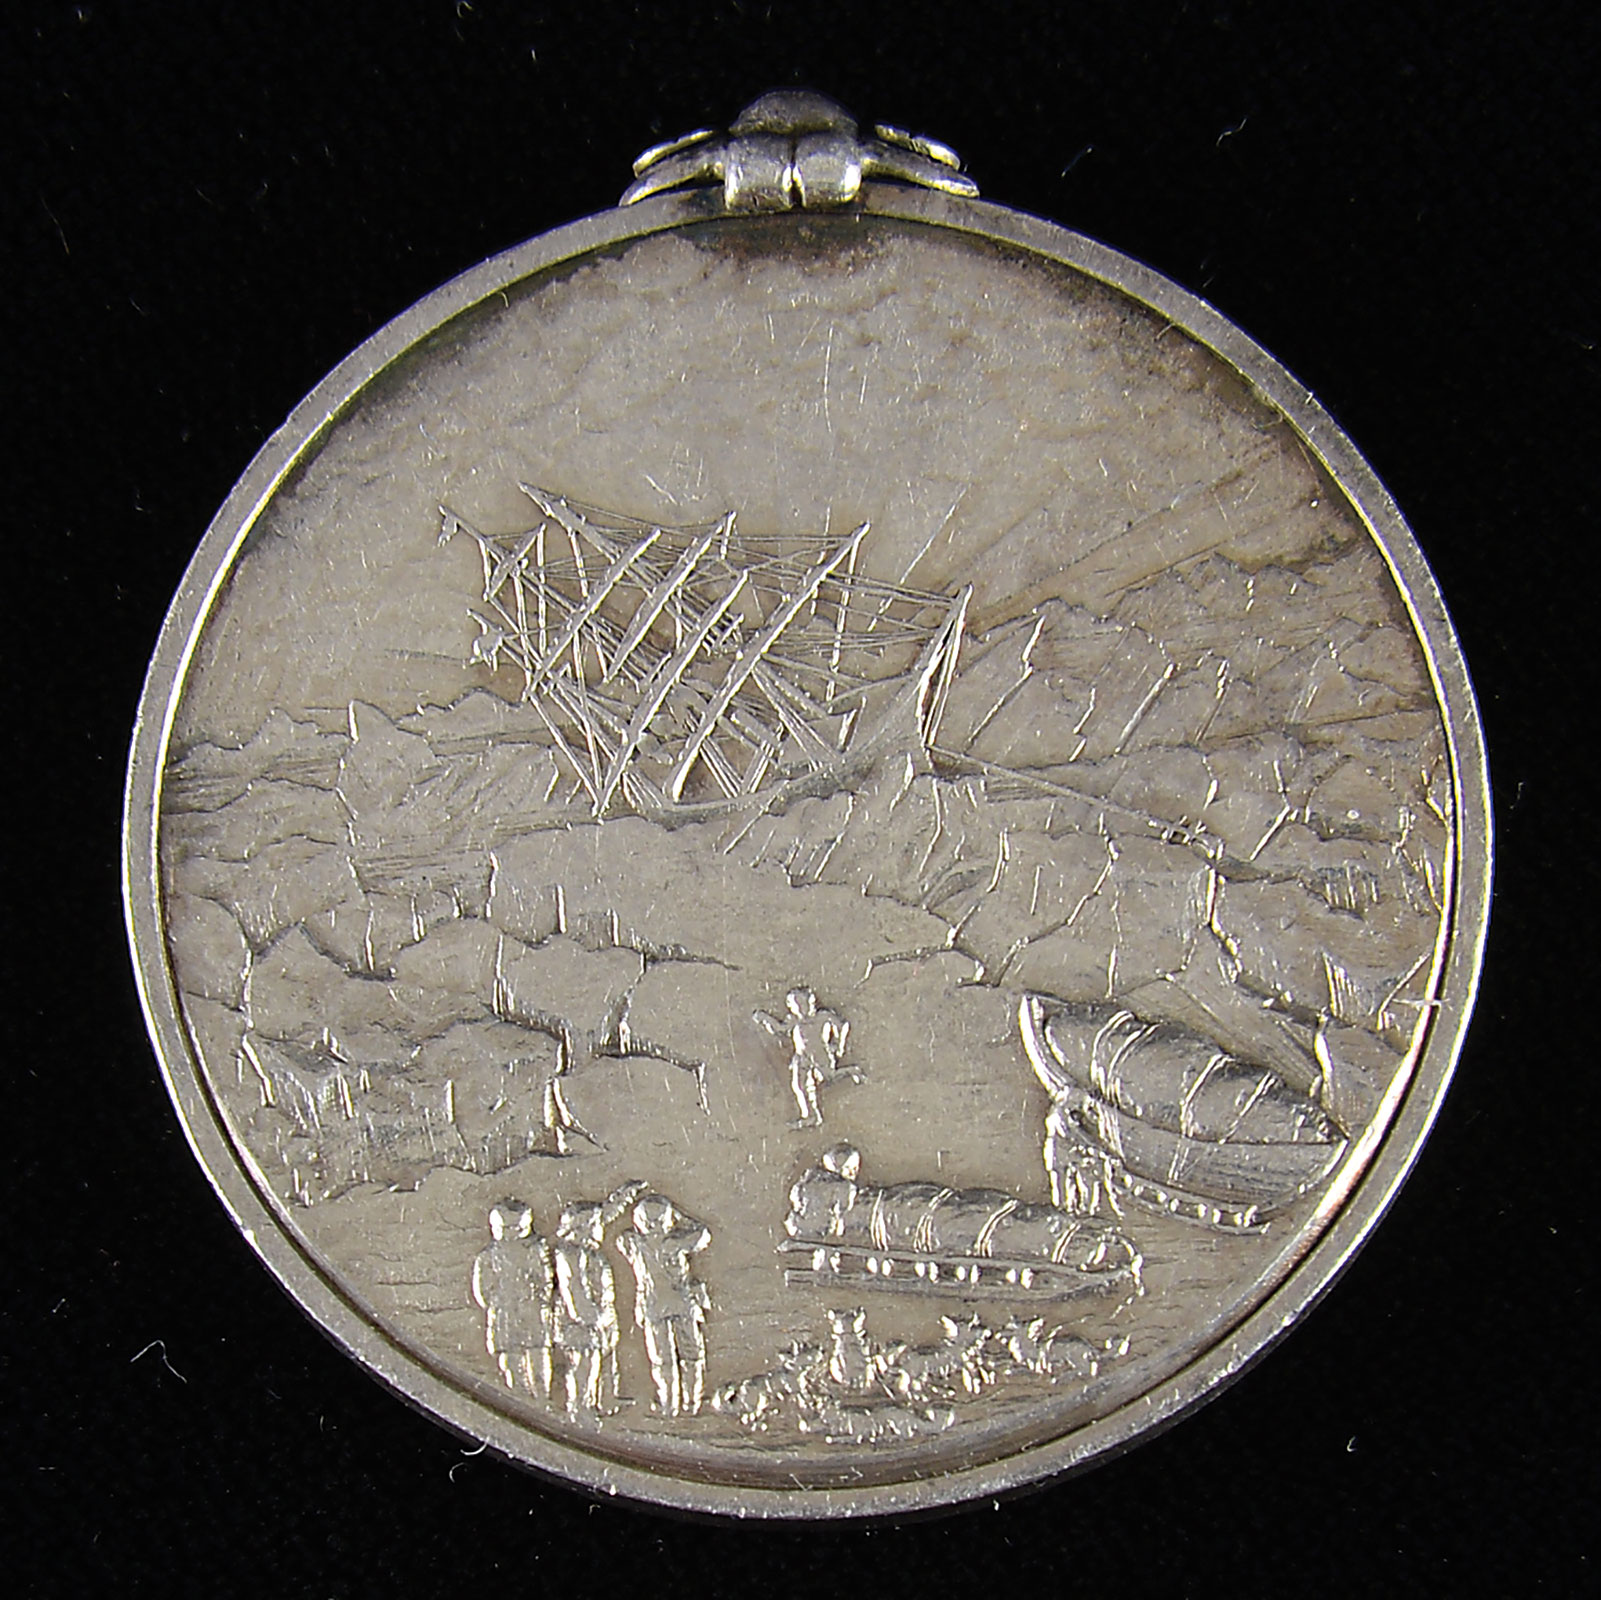 Silver Congressional Medal for Survivor "Charles Tong Sing" of the "Jeannette" Arctic Expedition of 1879-1882, estimated at $12,000-18,000.